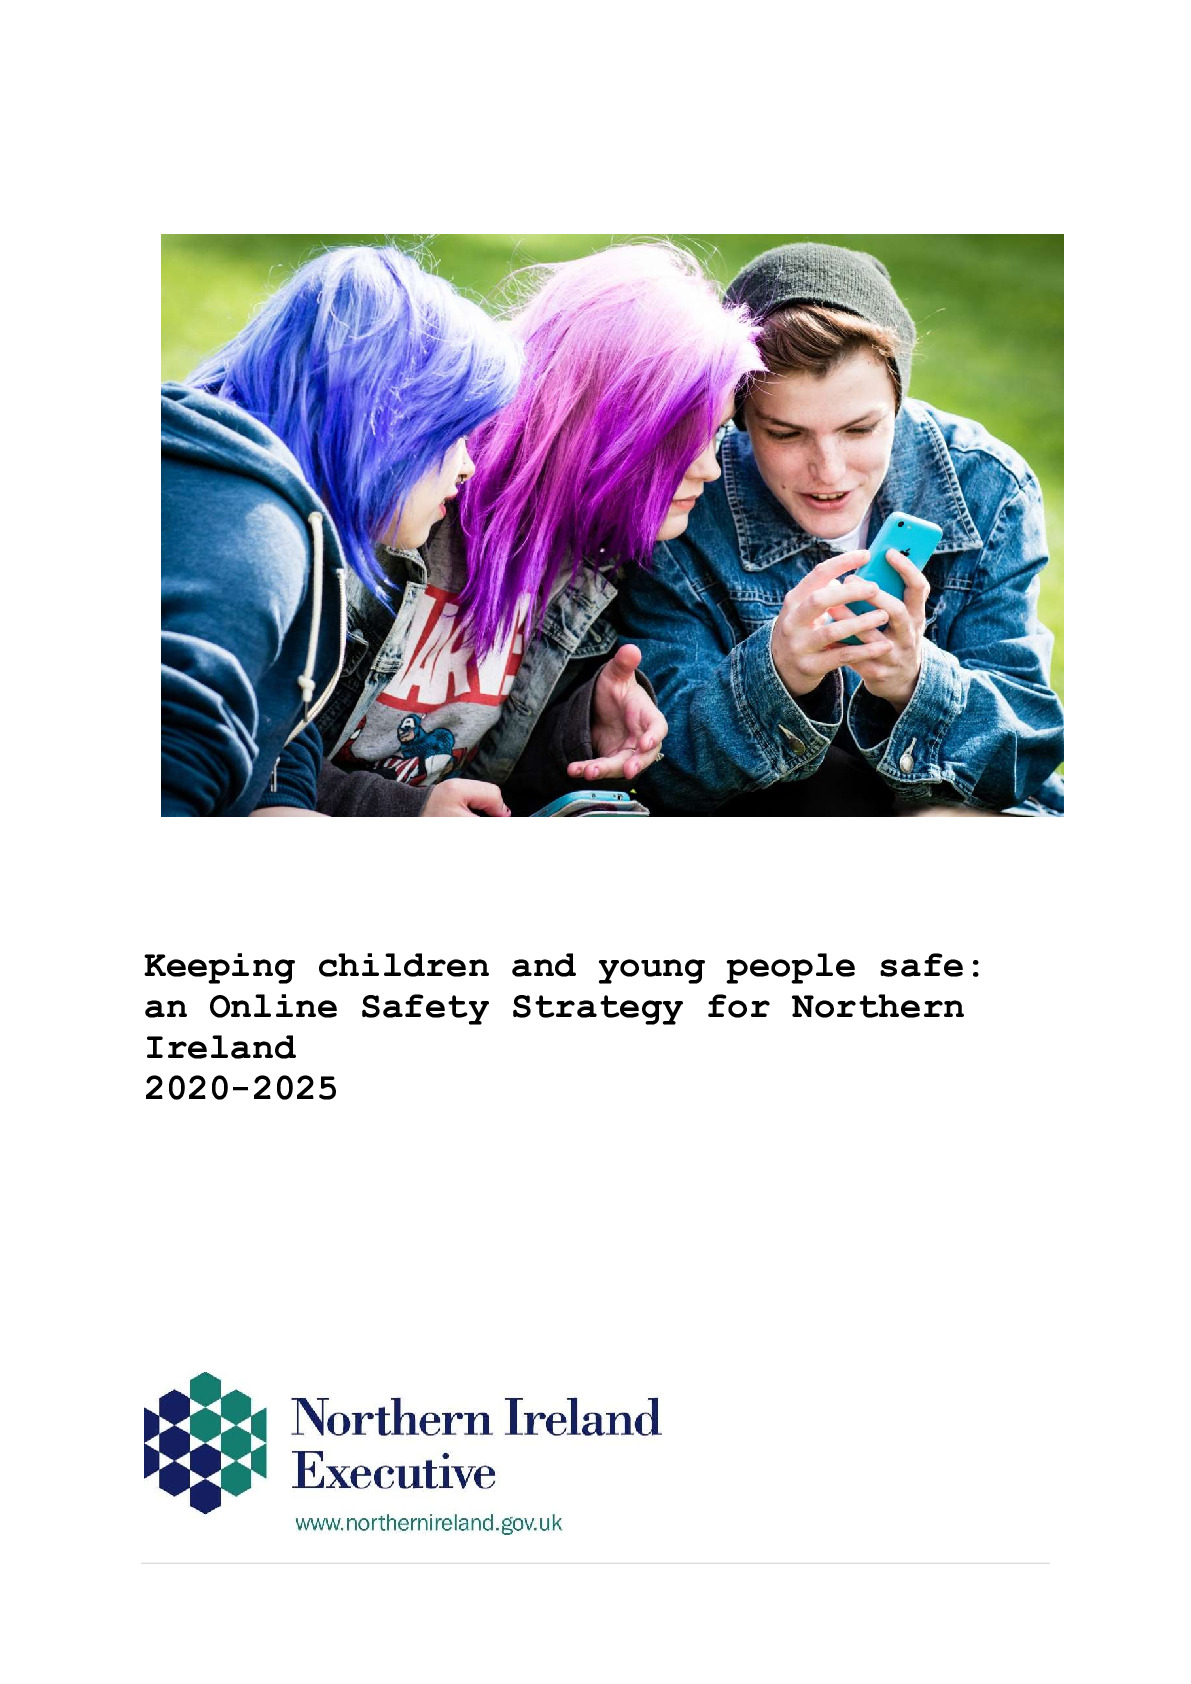 online-safety-strategy - published